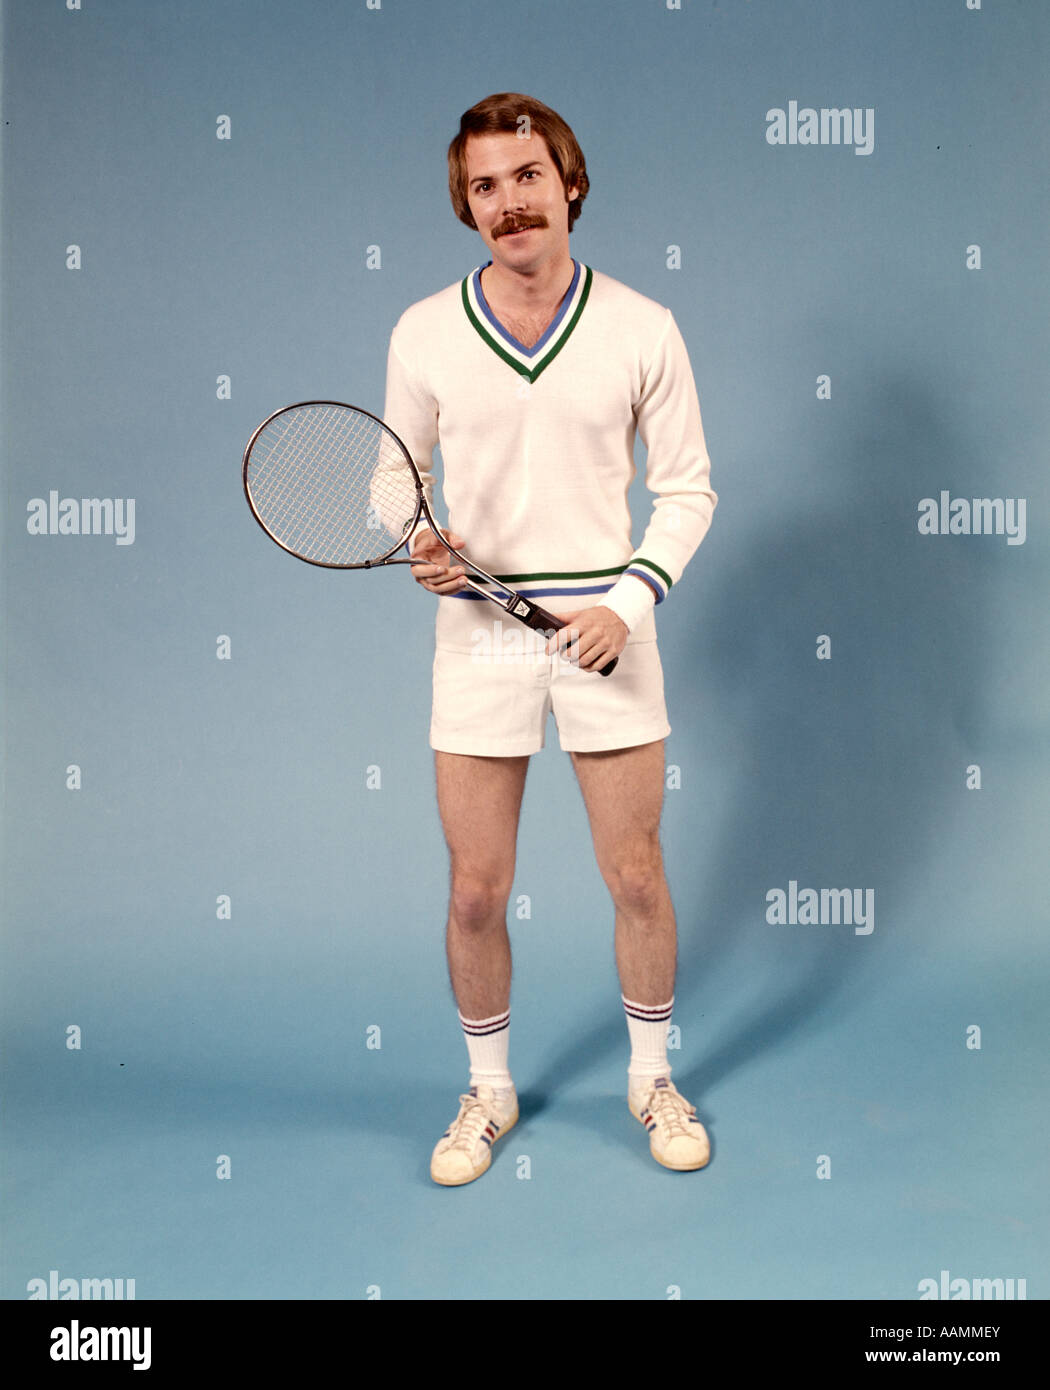 1970 1970s FULL FIGURE MAN STANDING WEAR TENNIS CLOTHES OUTFIT SHORTS  SWEATER RACKET FASHION SPORT SPORTS MEN RETRO Stock Photo - Alamy